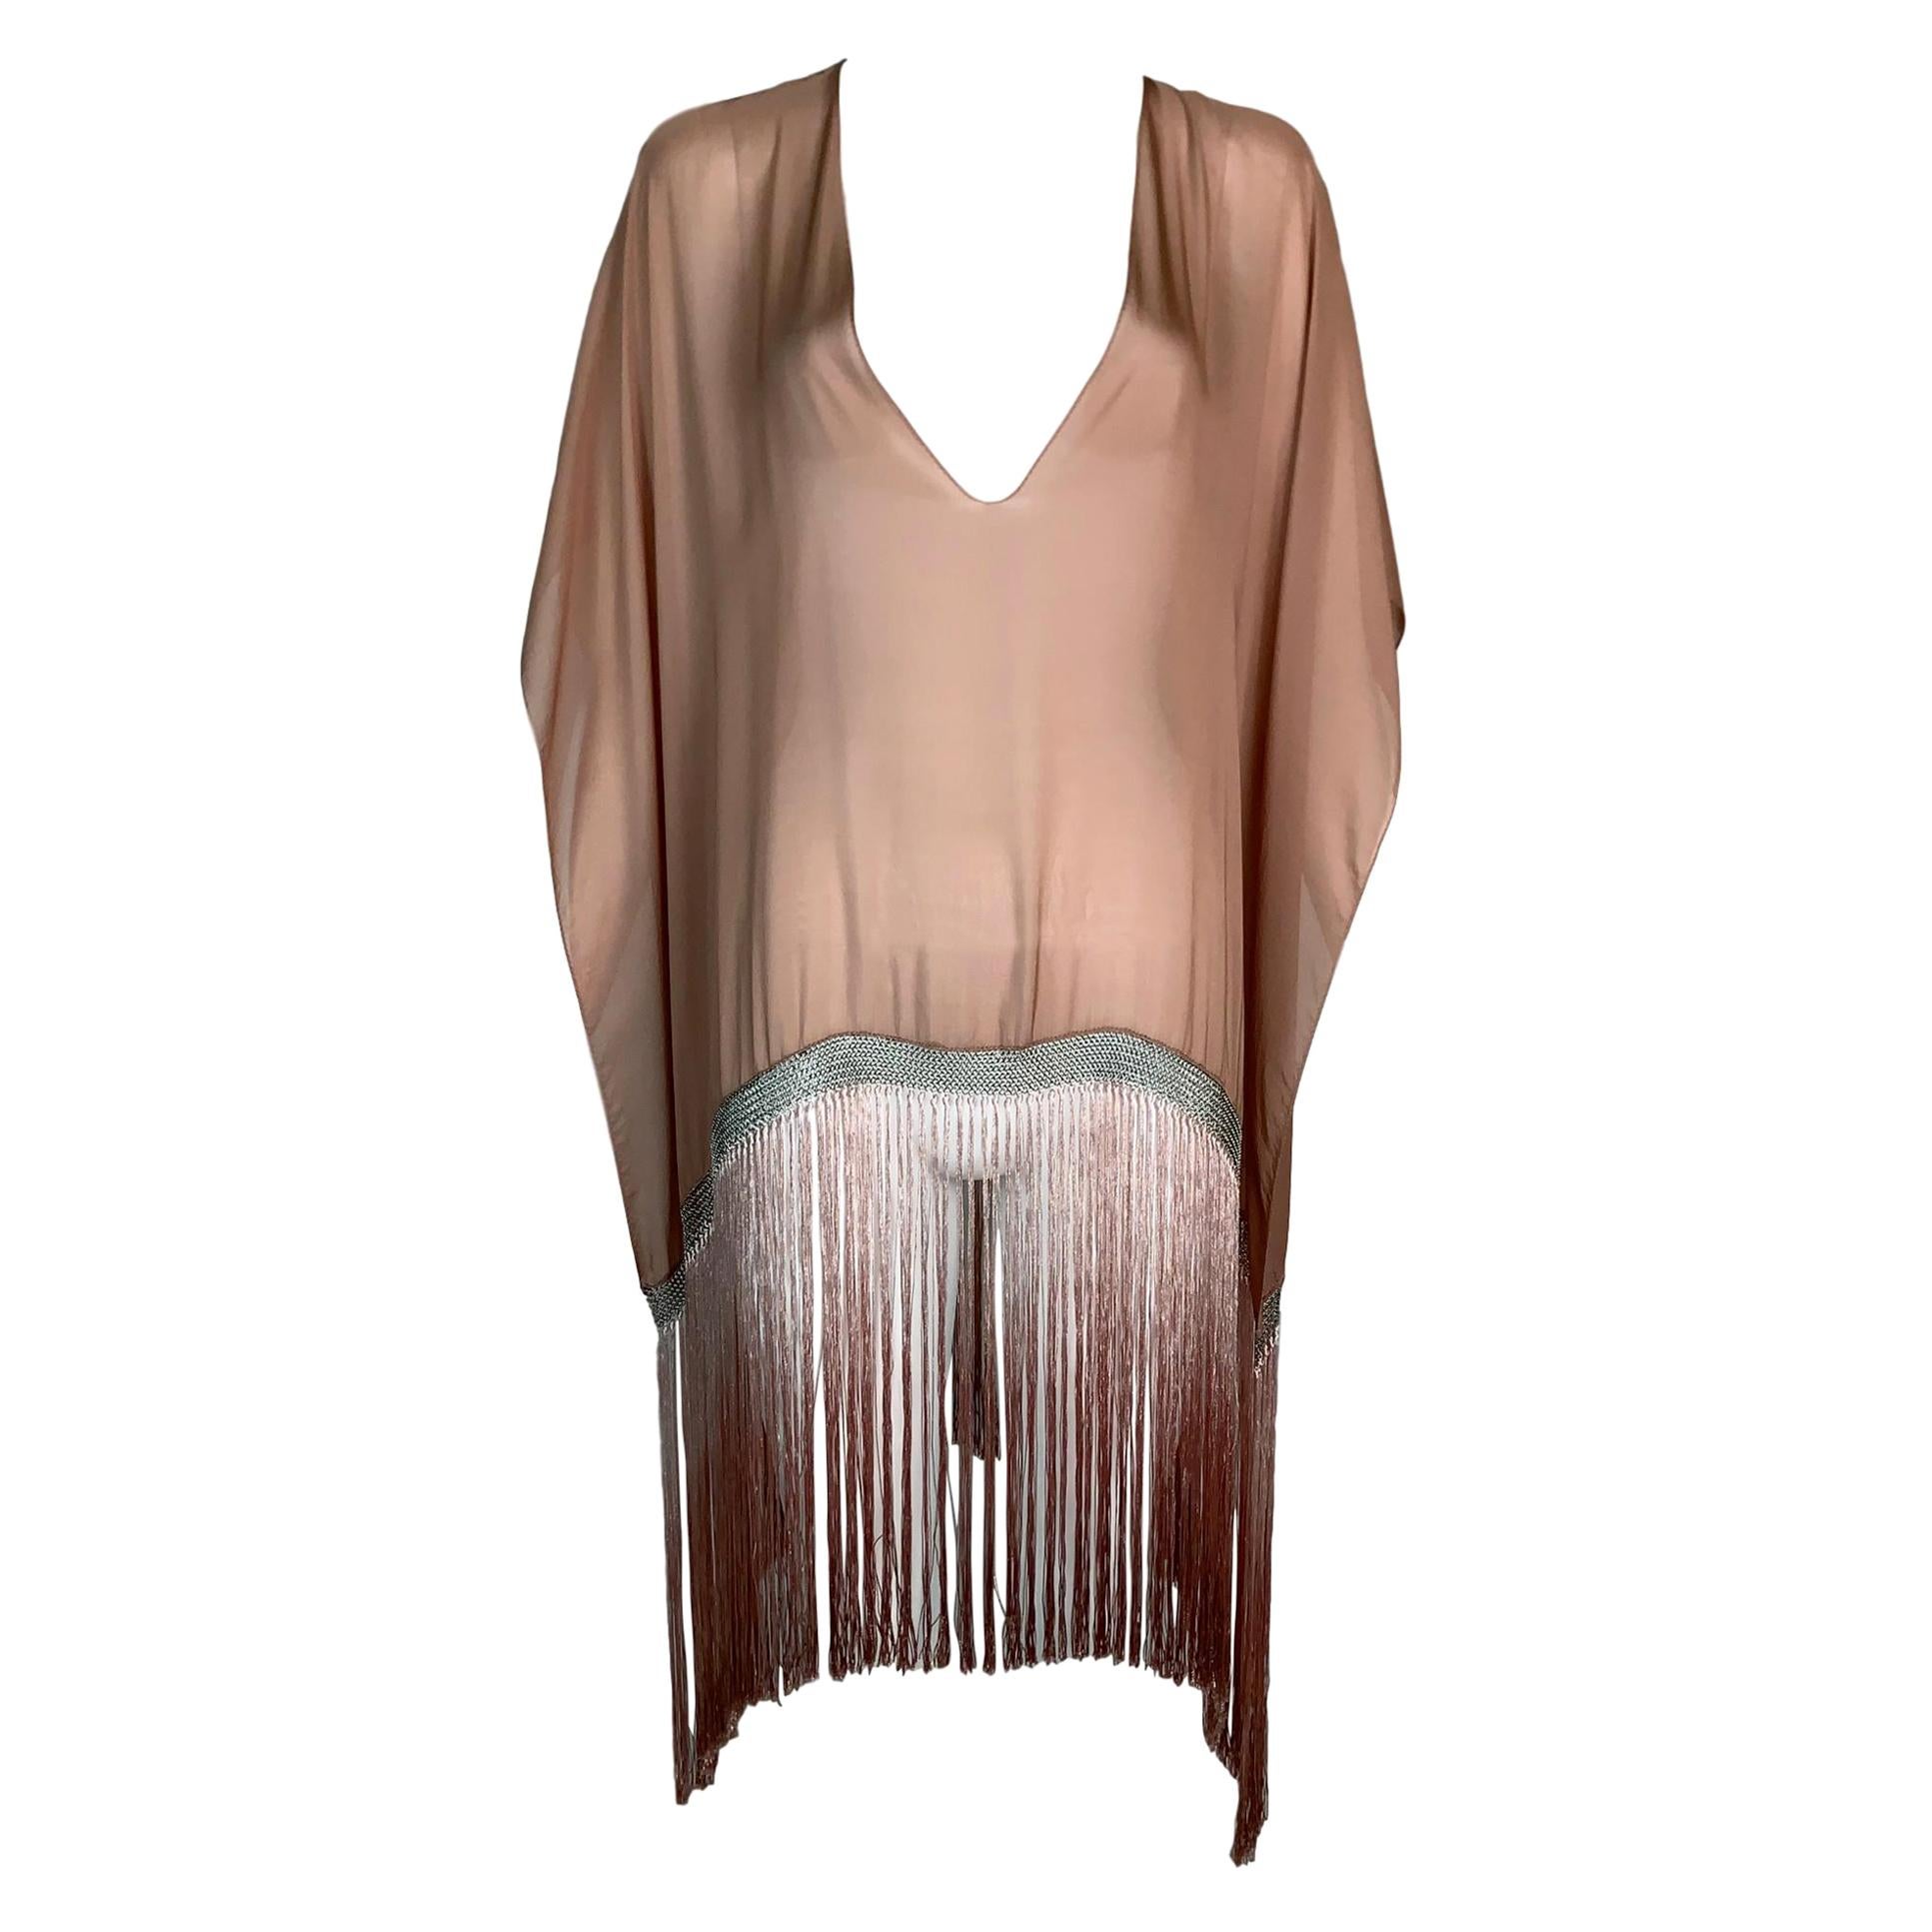 S/S 2004 Gucci Tom Ford Runway Sheer Pink Runway Fringe Chainmail Poncho Top